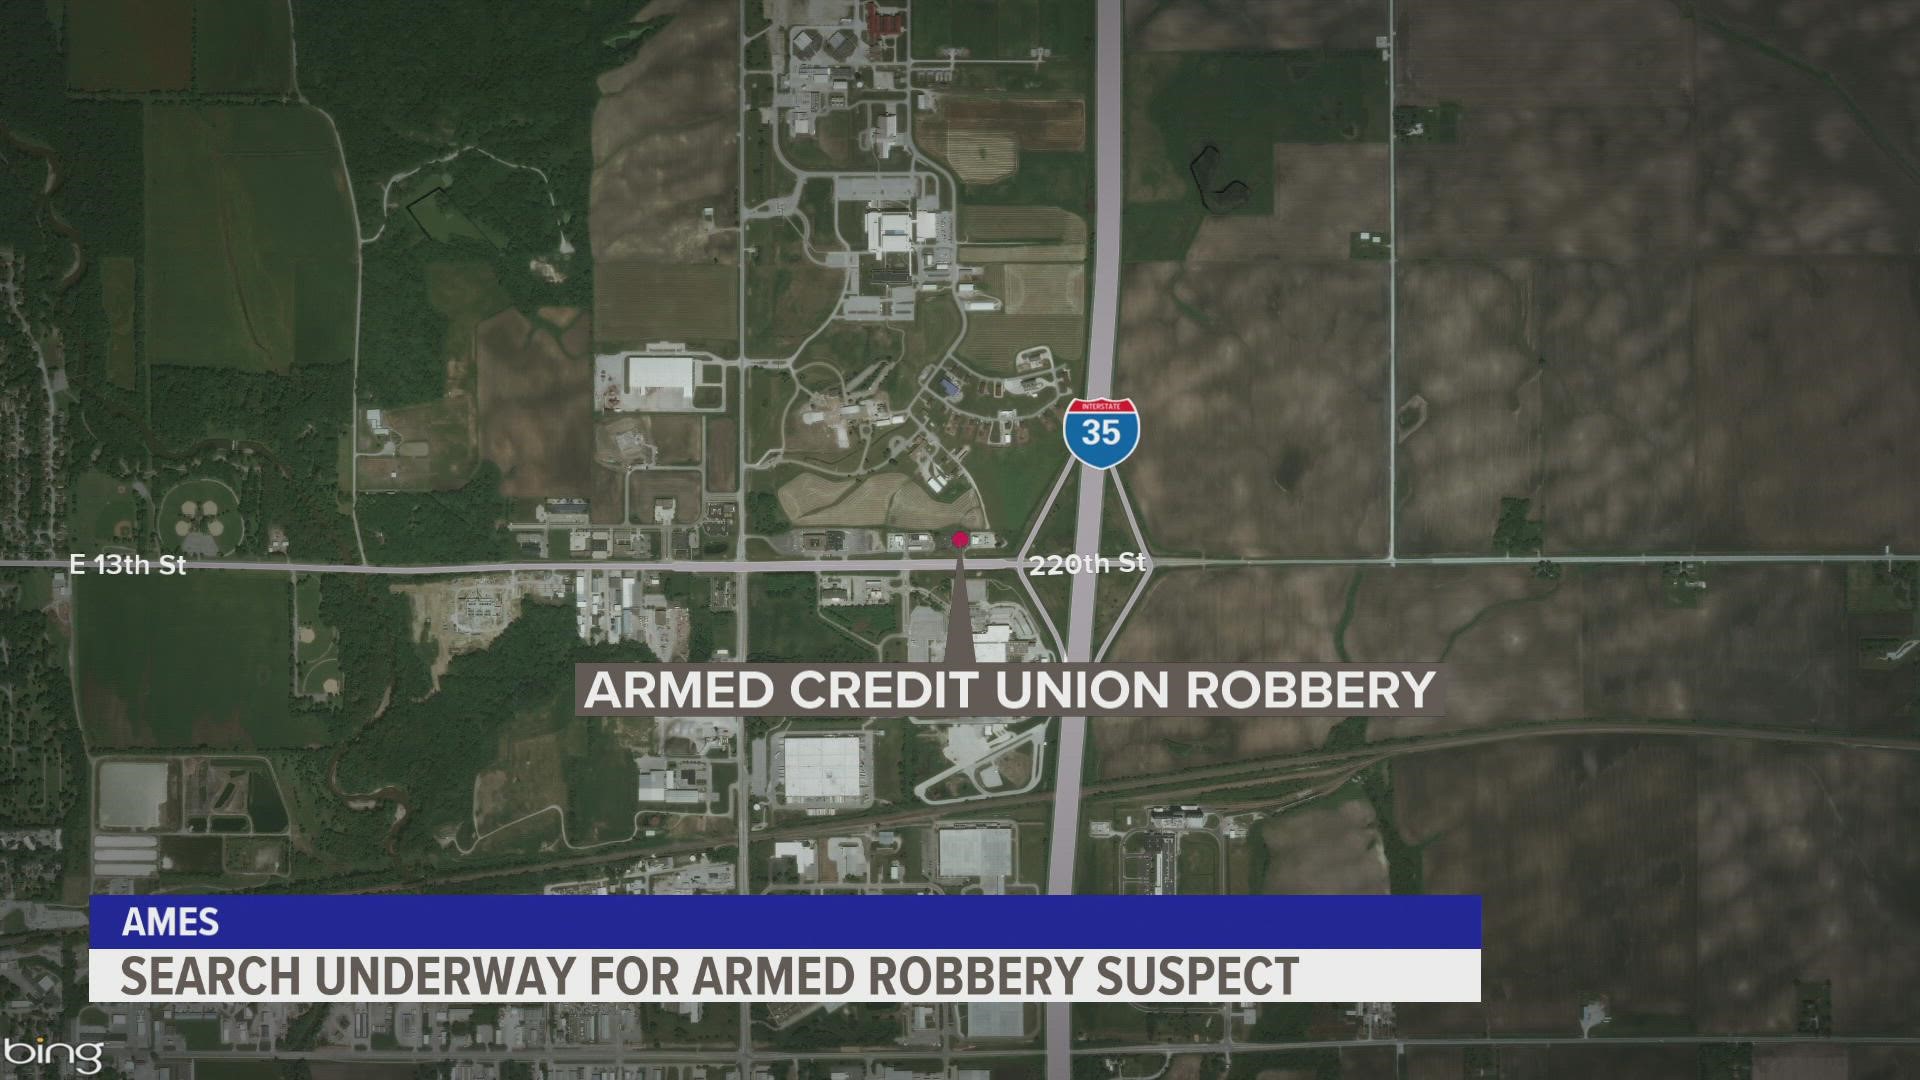 The Ames Police Department says the robbery happened around 9:30 a.m. Tuesday at the River Valley Credit Union located at 2811 E 13th St.